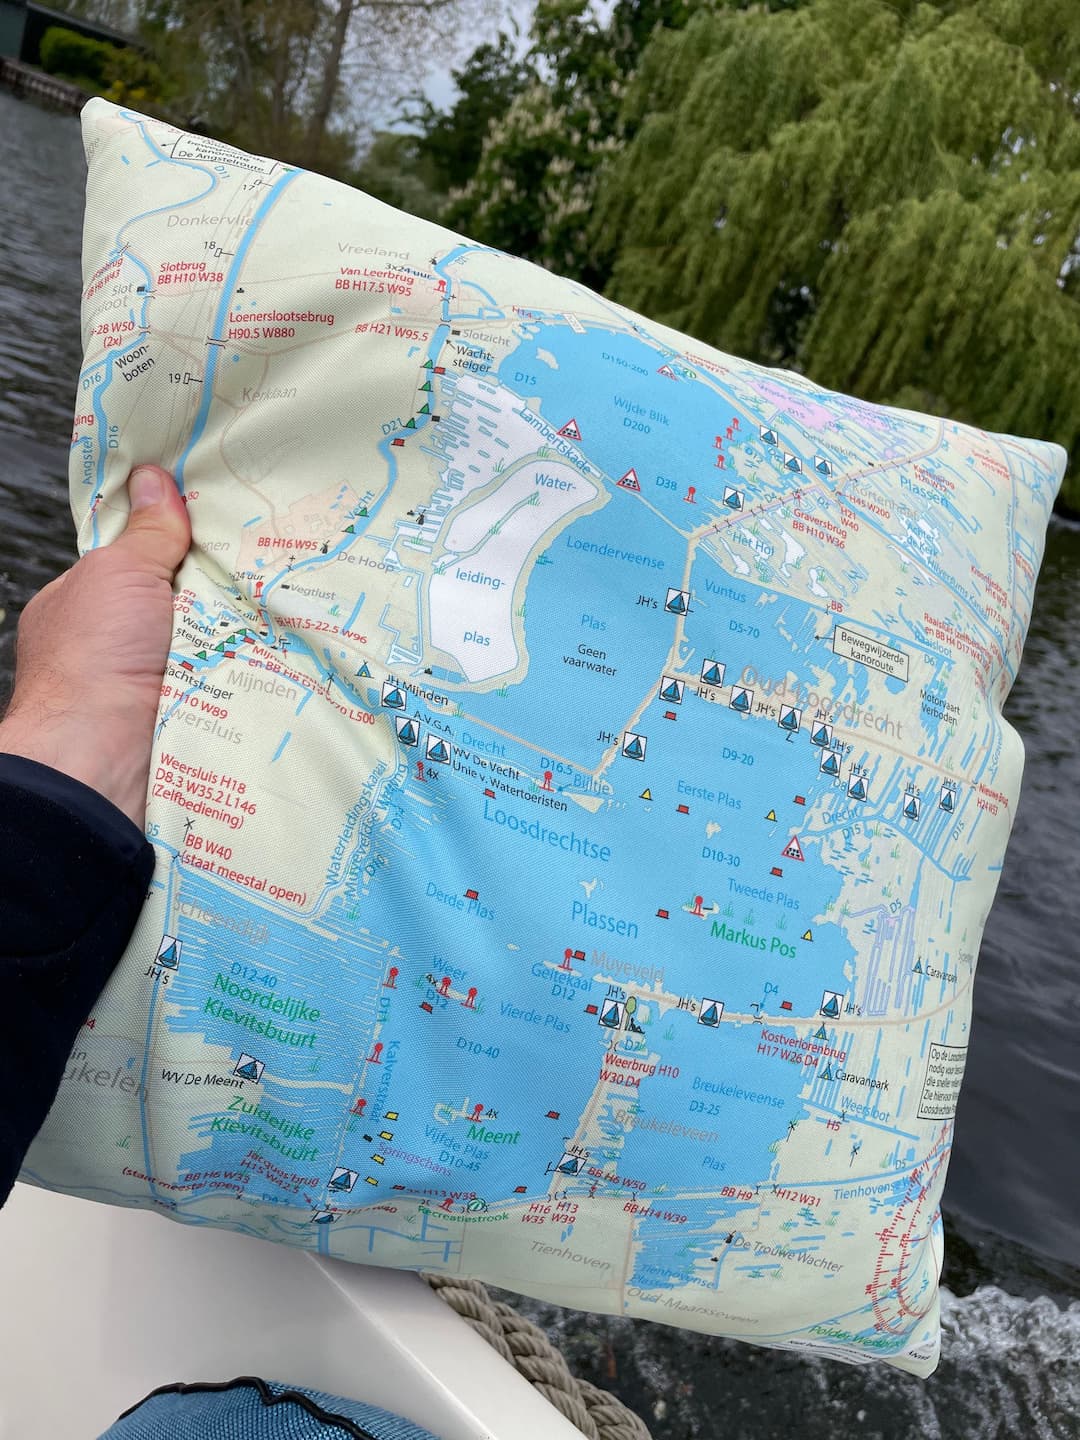 Another example. A map on a cushion in a boat.